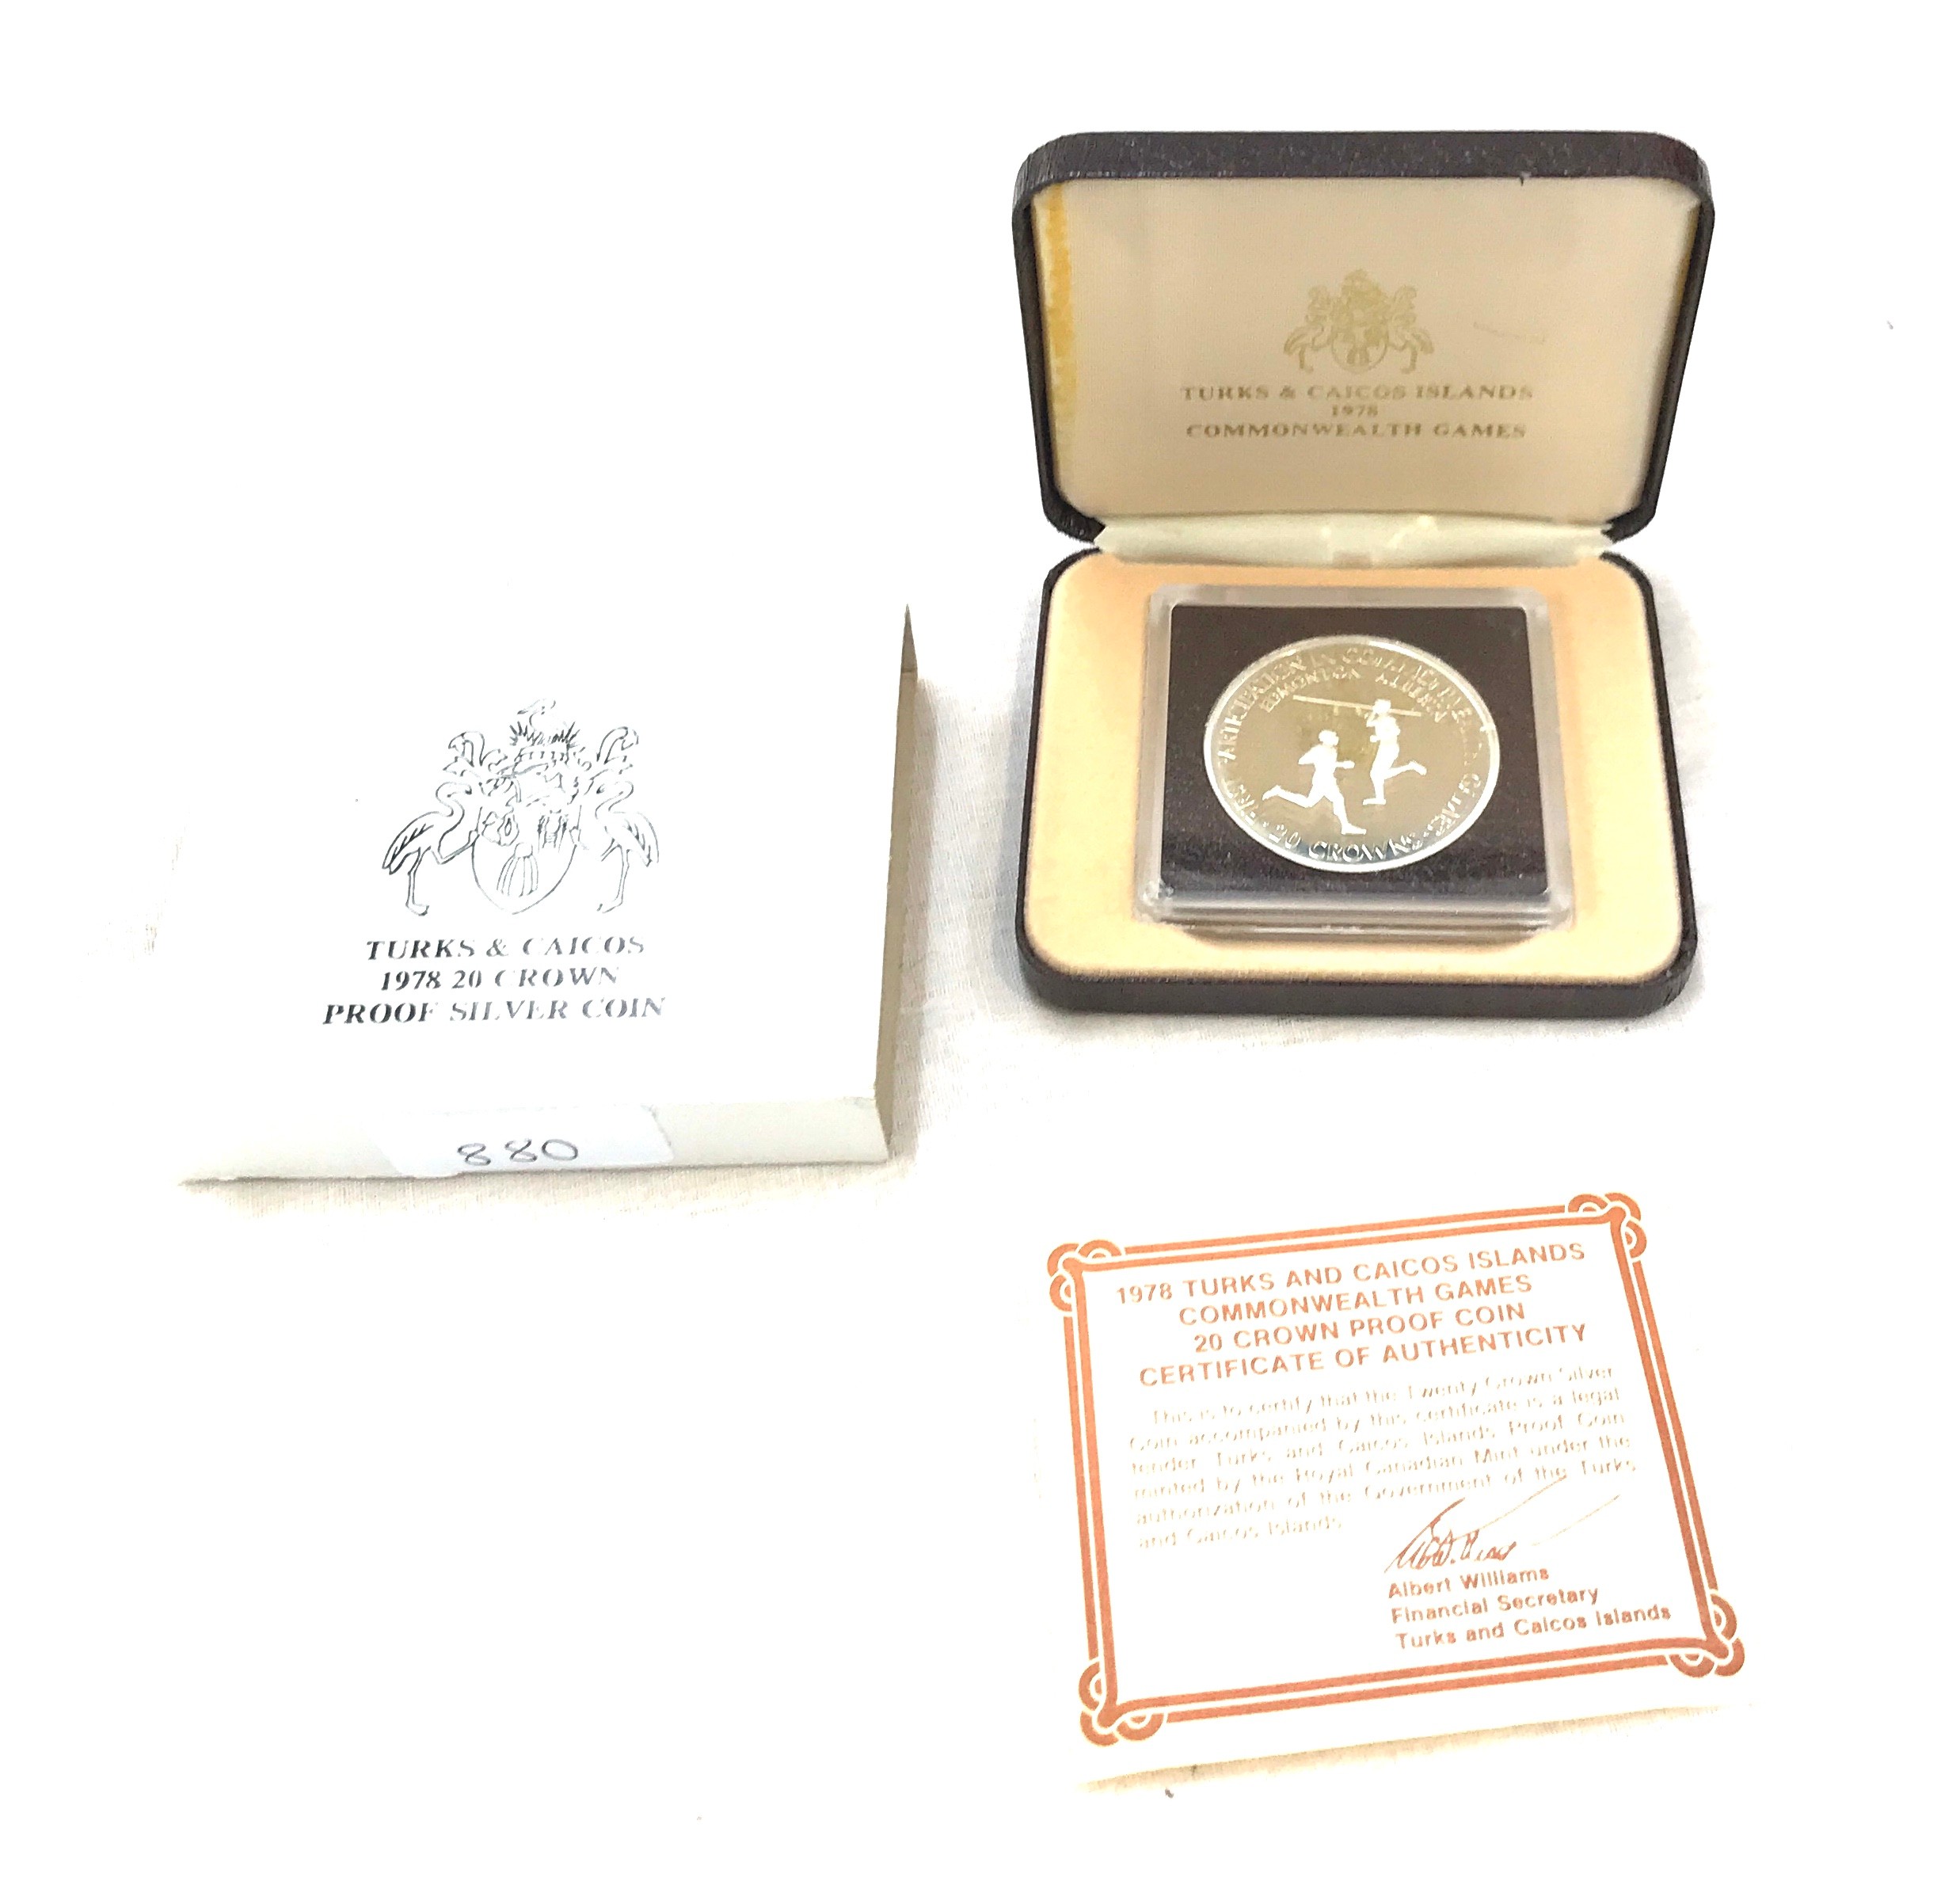 Cased 1978 Turks and Caicos Islands commonwealth games 20 crown silver proof coin with COA